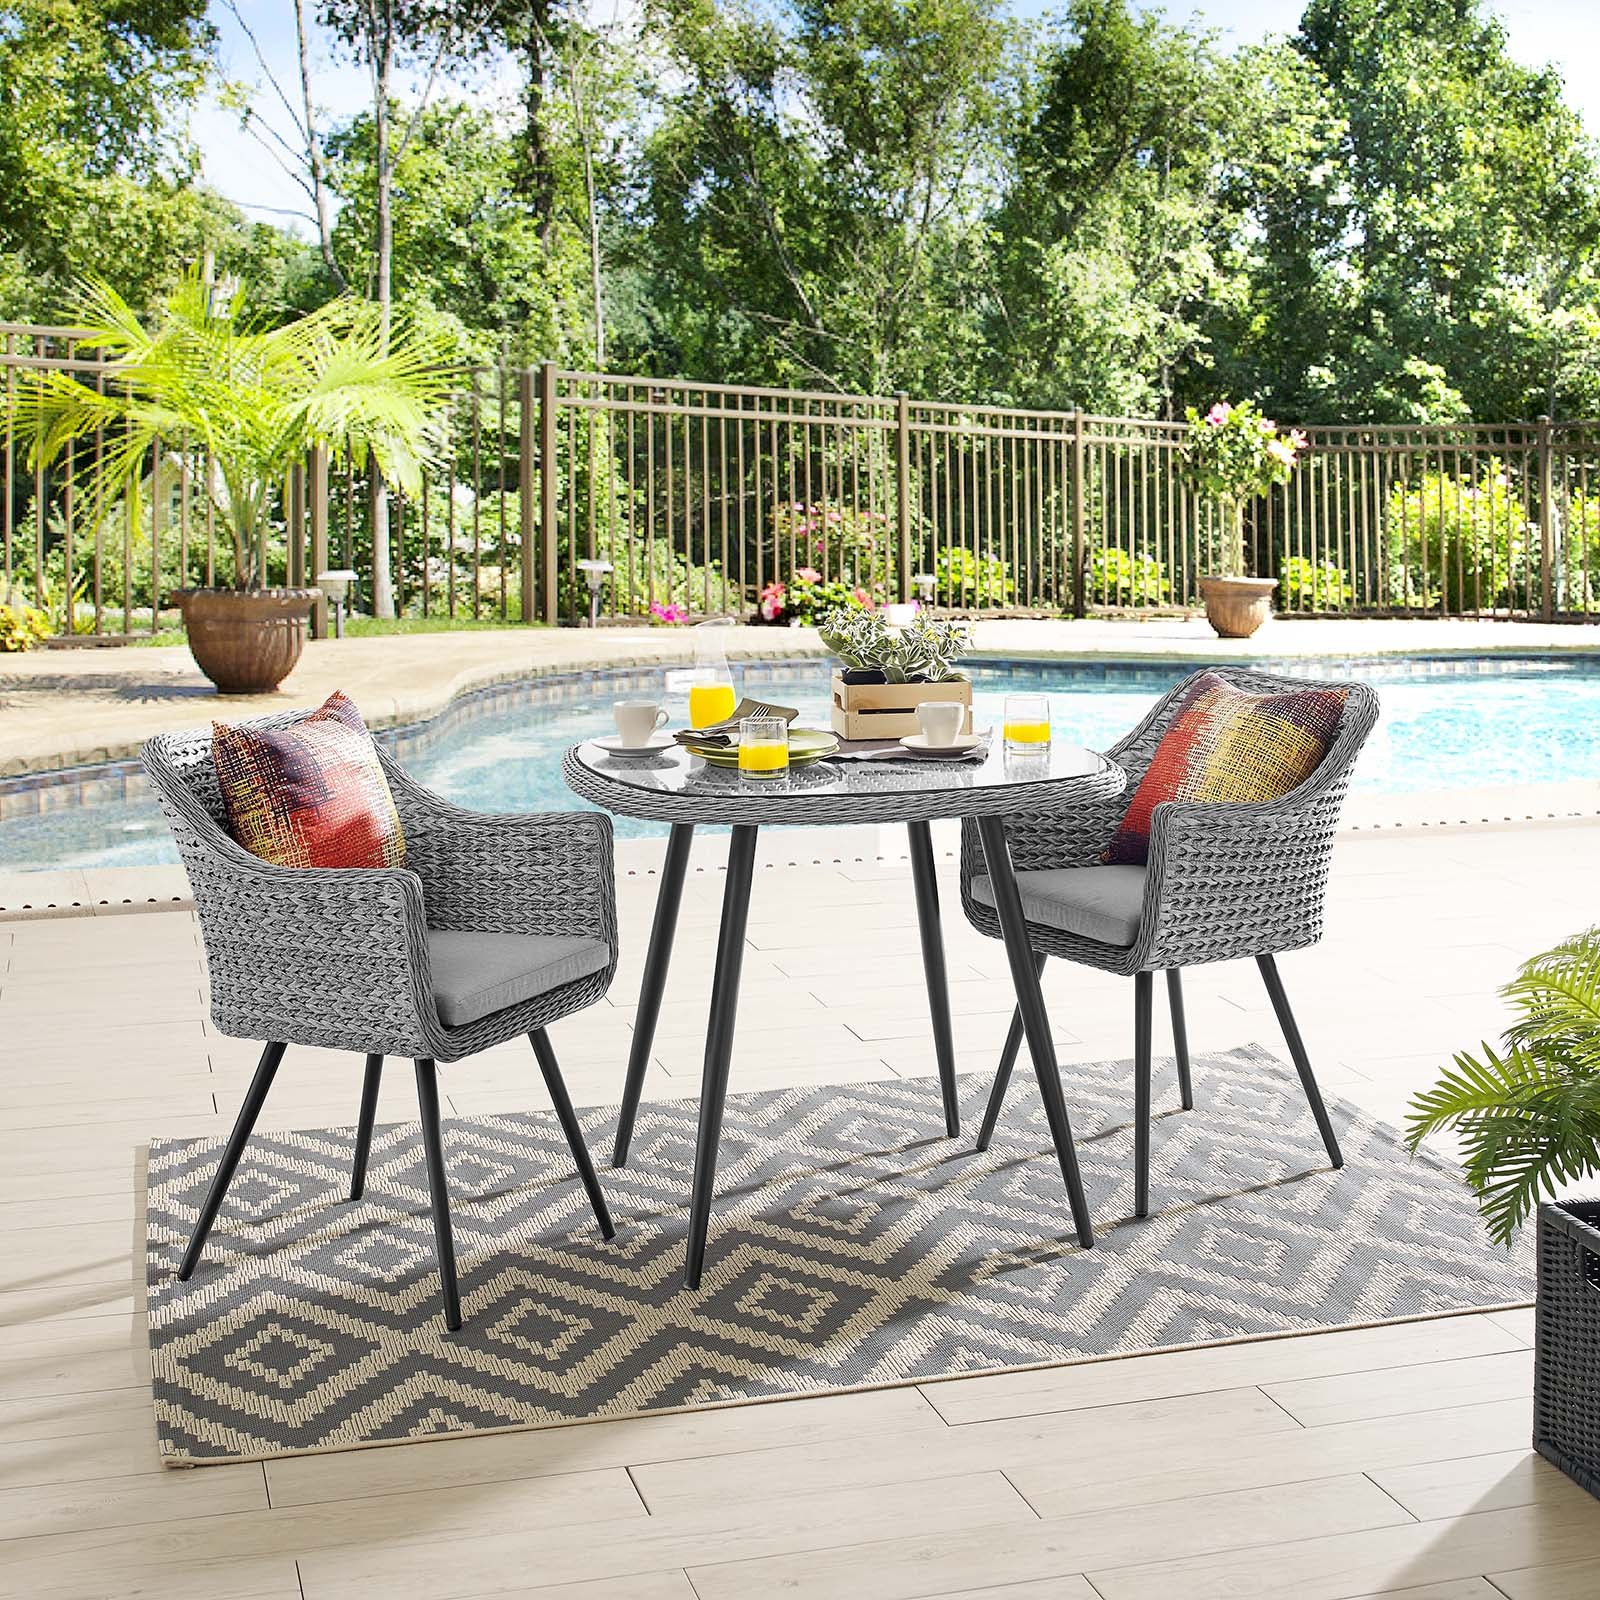 Modway Outdoor Dining Sets - Endeavor Outdoor Dining Set For 2 Gray